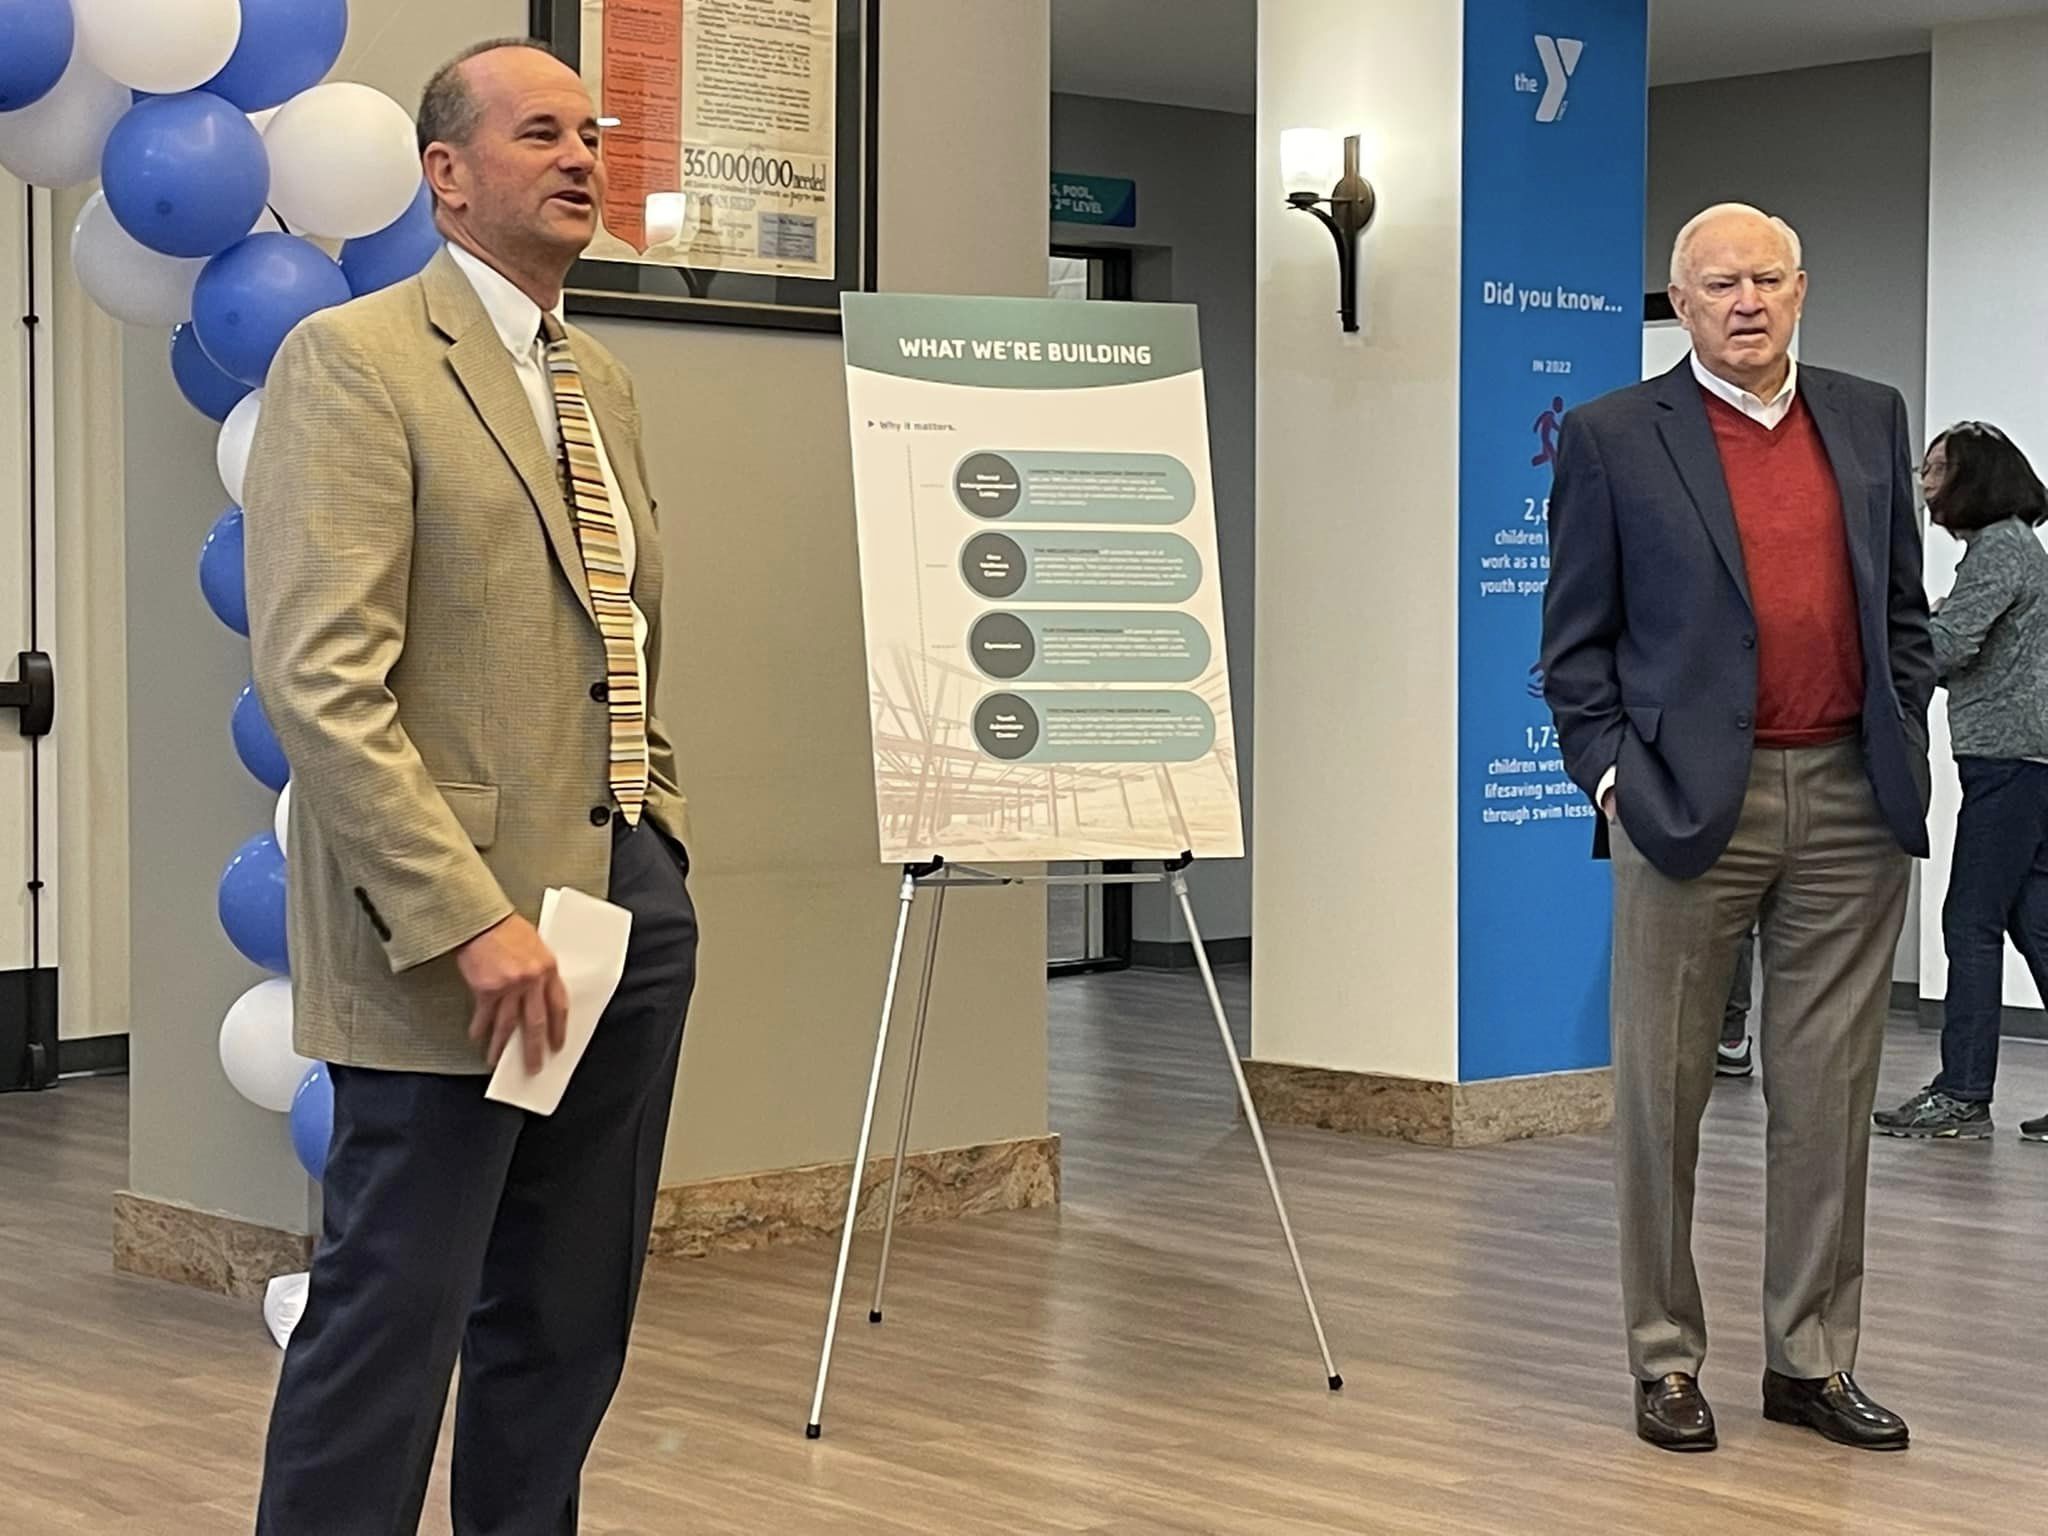 Saratoga Regional YMCA kicks off public phase of Capital Campaign to expand West Avenue campus